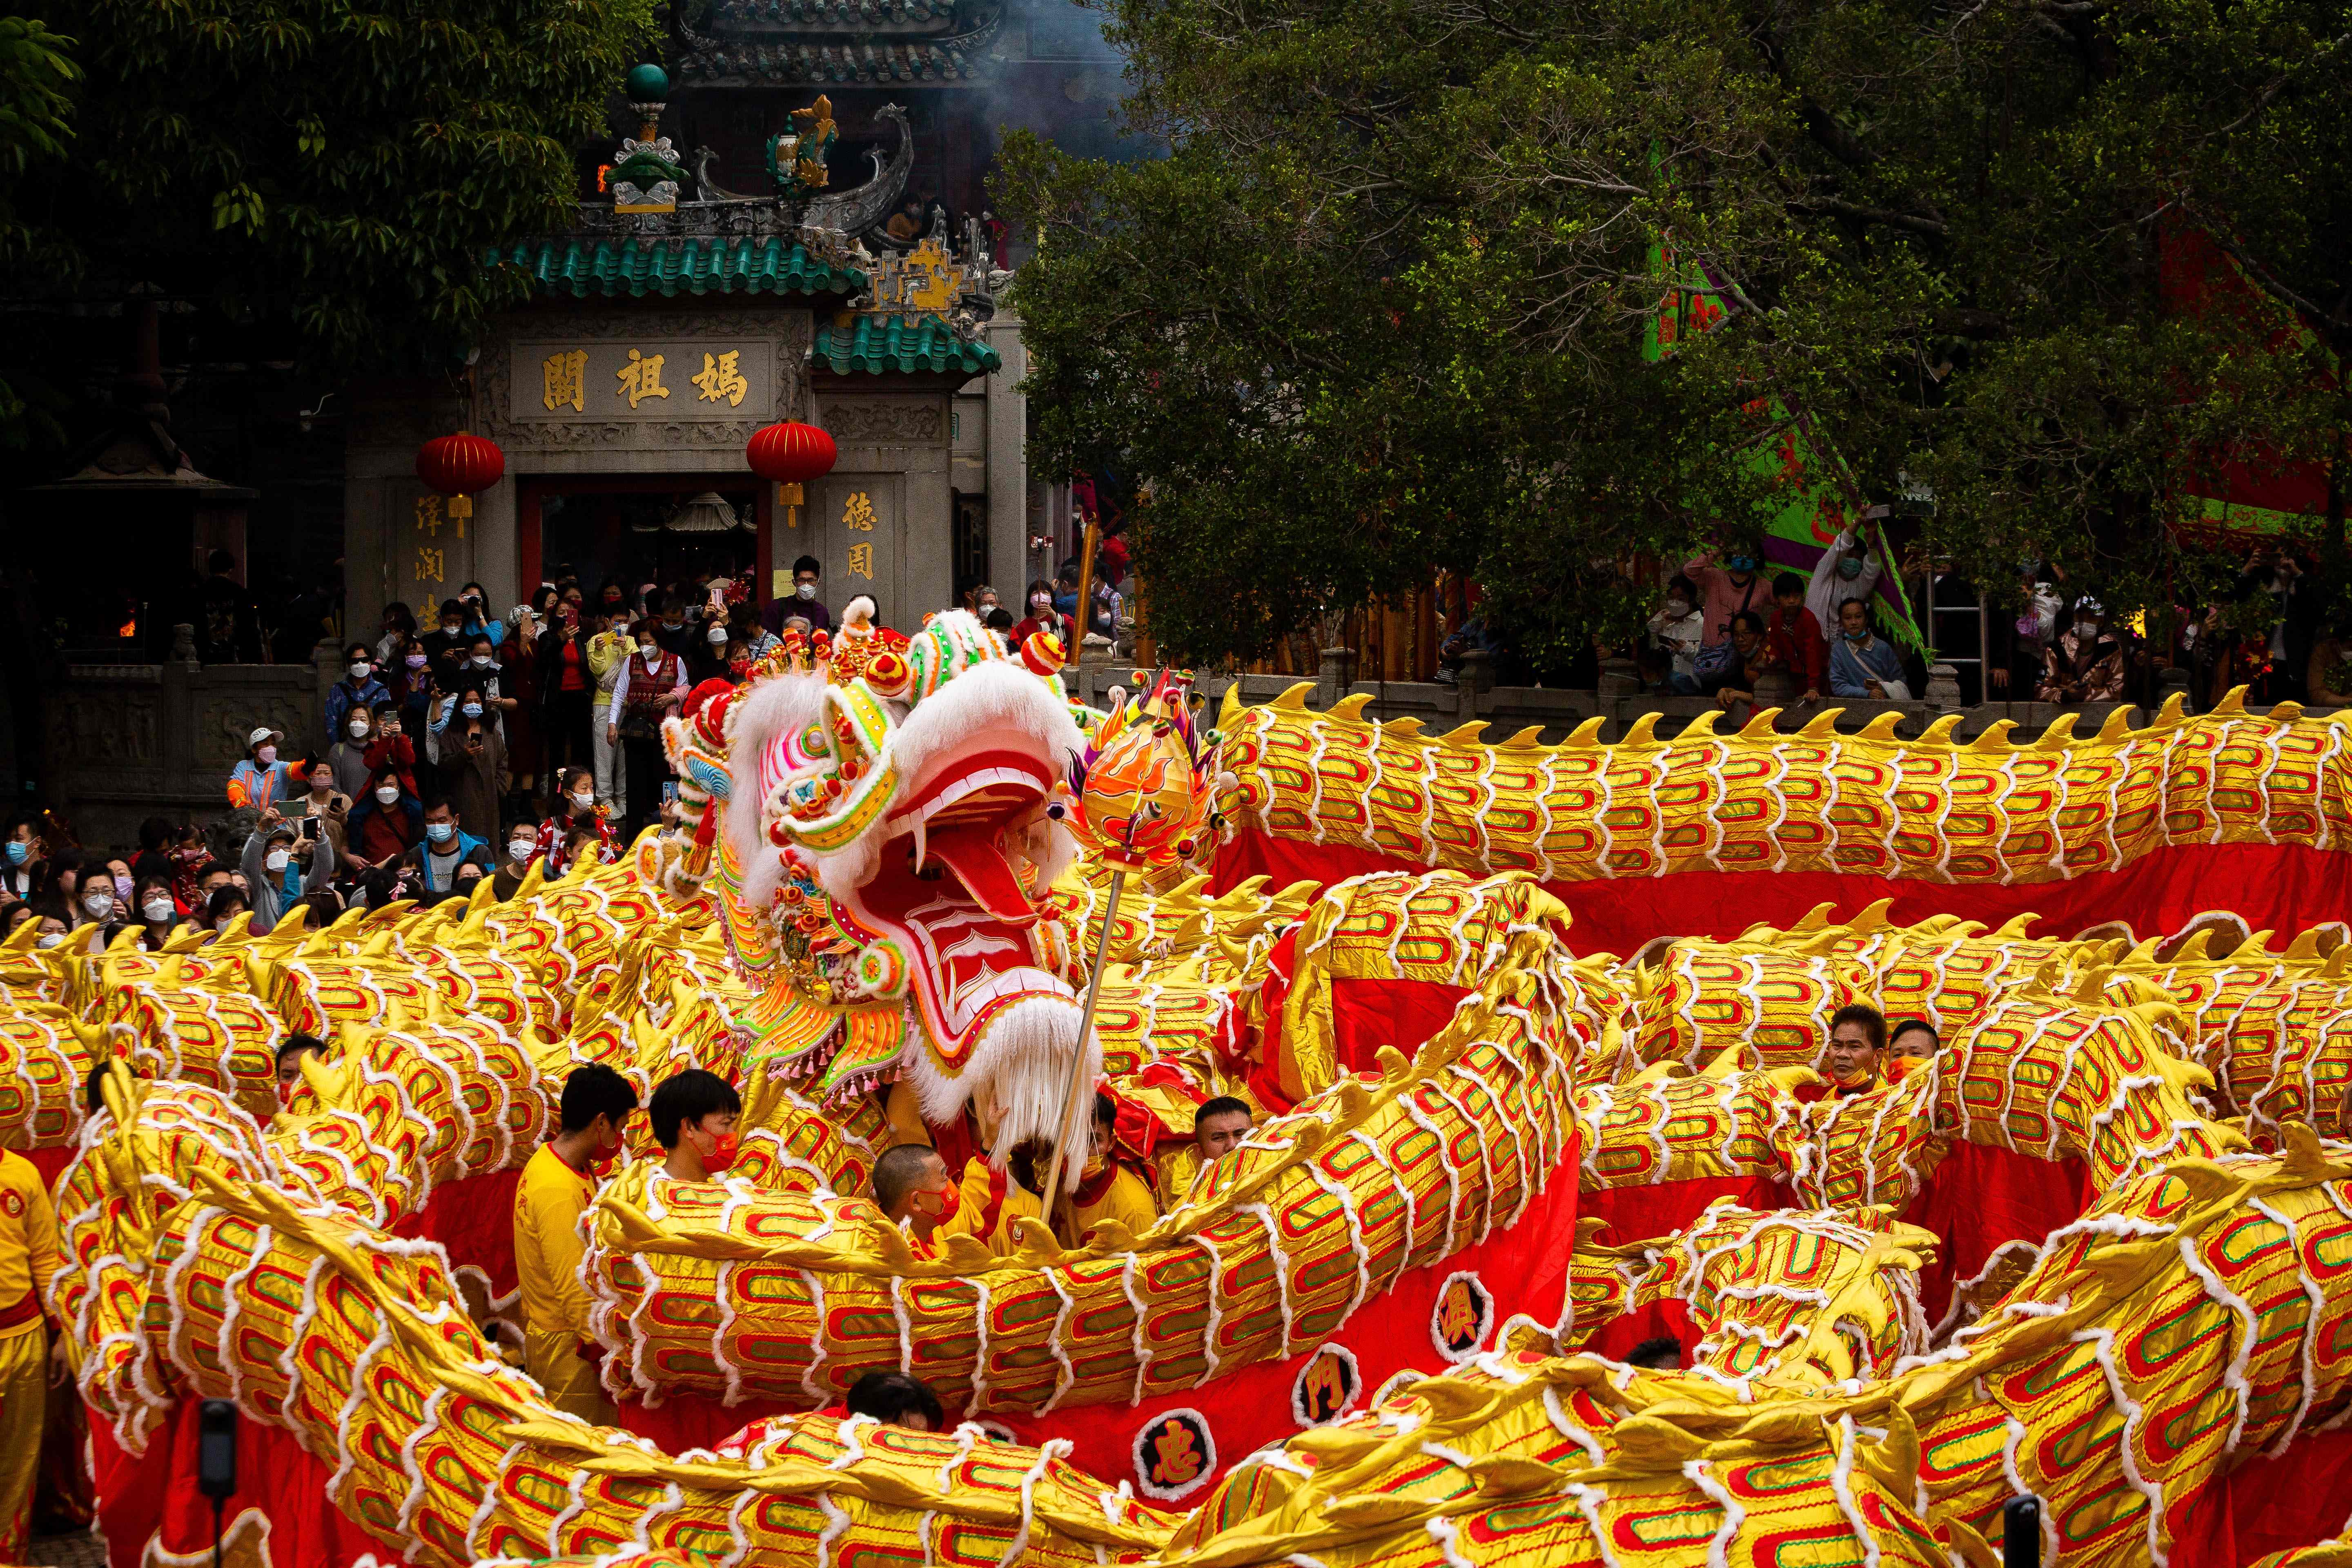 Lunar New Year 2023: The Year of the Rabbit in photos